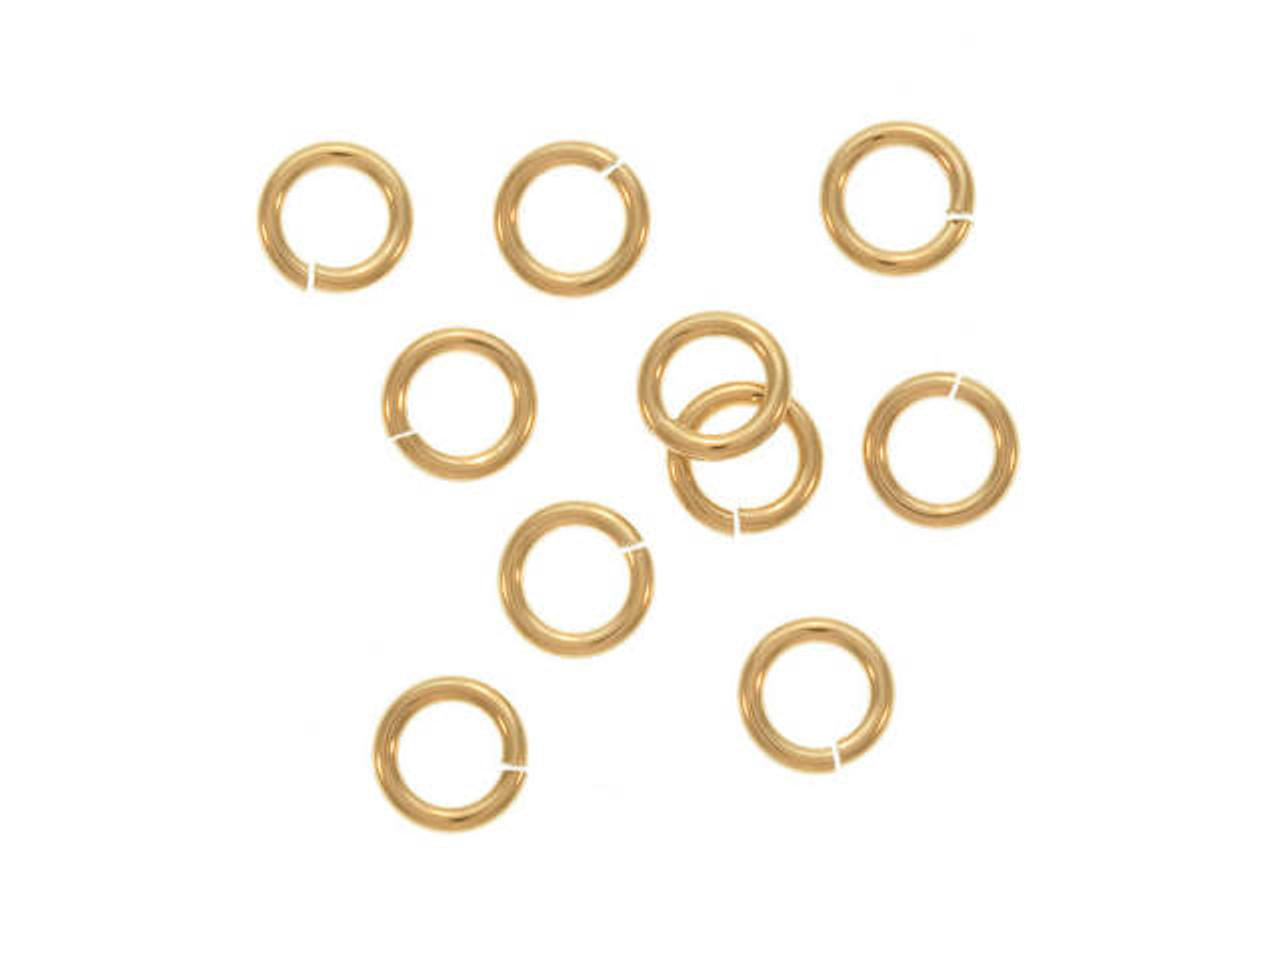 JUMPLOCK Jump Rings, Round 6mm 18 Gauge, Gold-Filled (10 Pieces